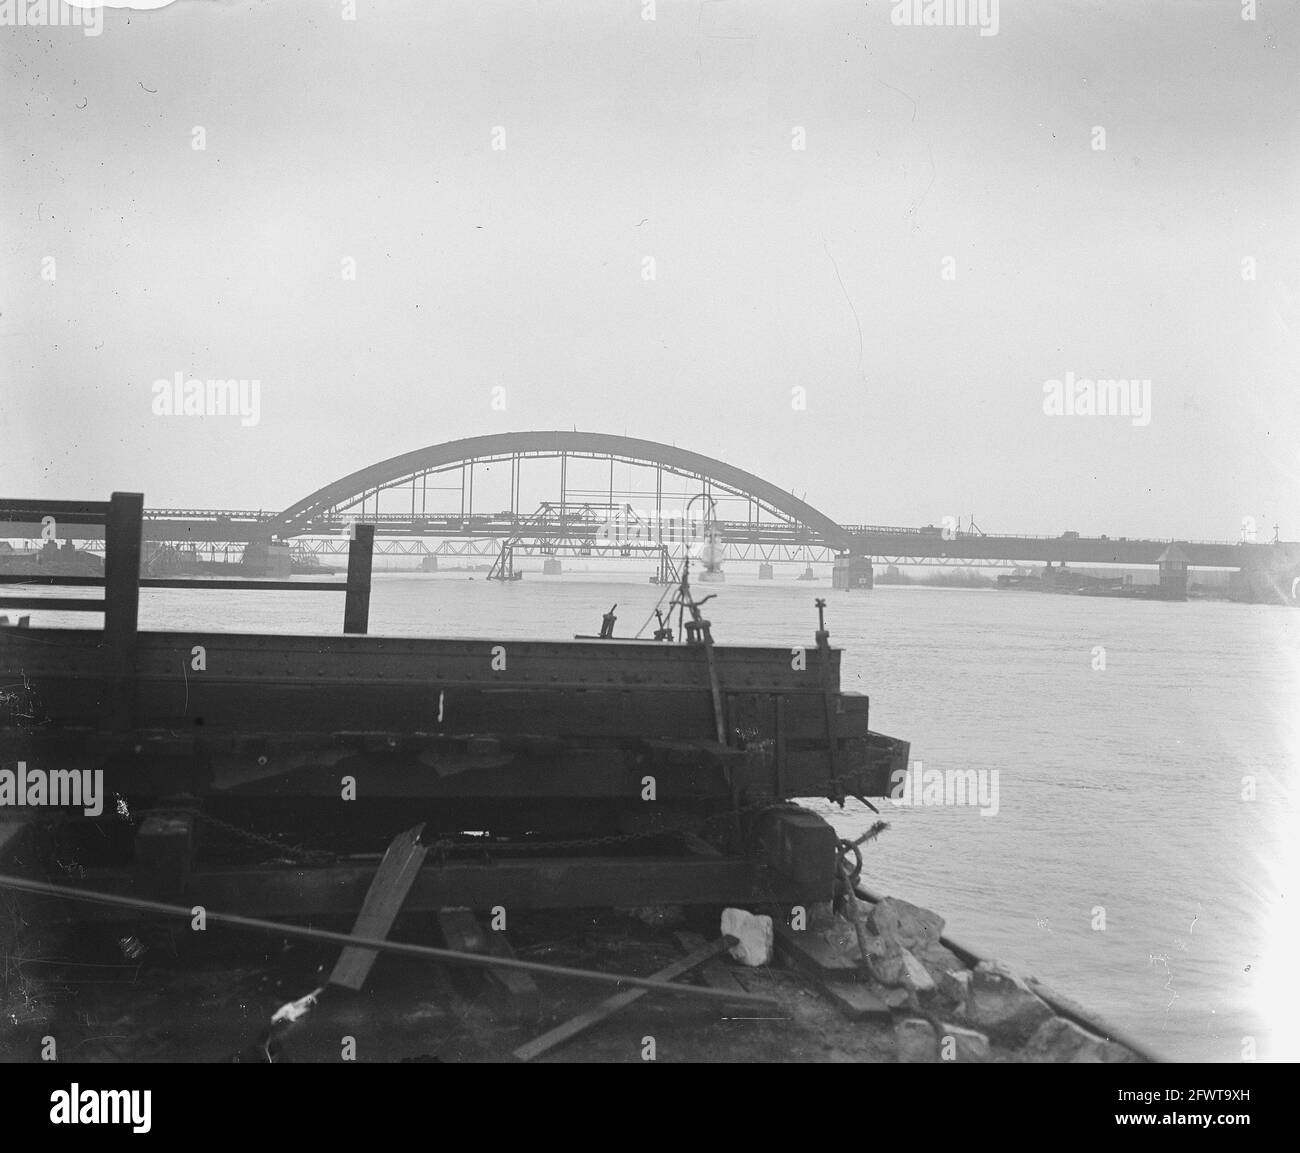 Emergency bridge at Hedel, 22 January 1948, The Netherlands, 20th century press agency photo, news to remember, documentary, historic photography 1945-1990, visual stories, human history of the Twentieth Century, capturing moments in time Stock Photo